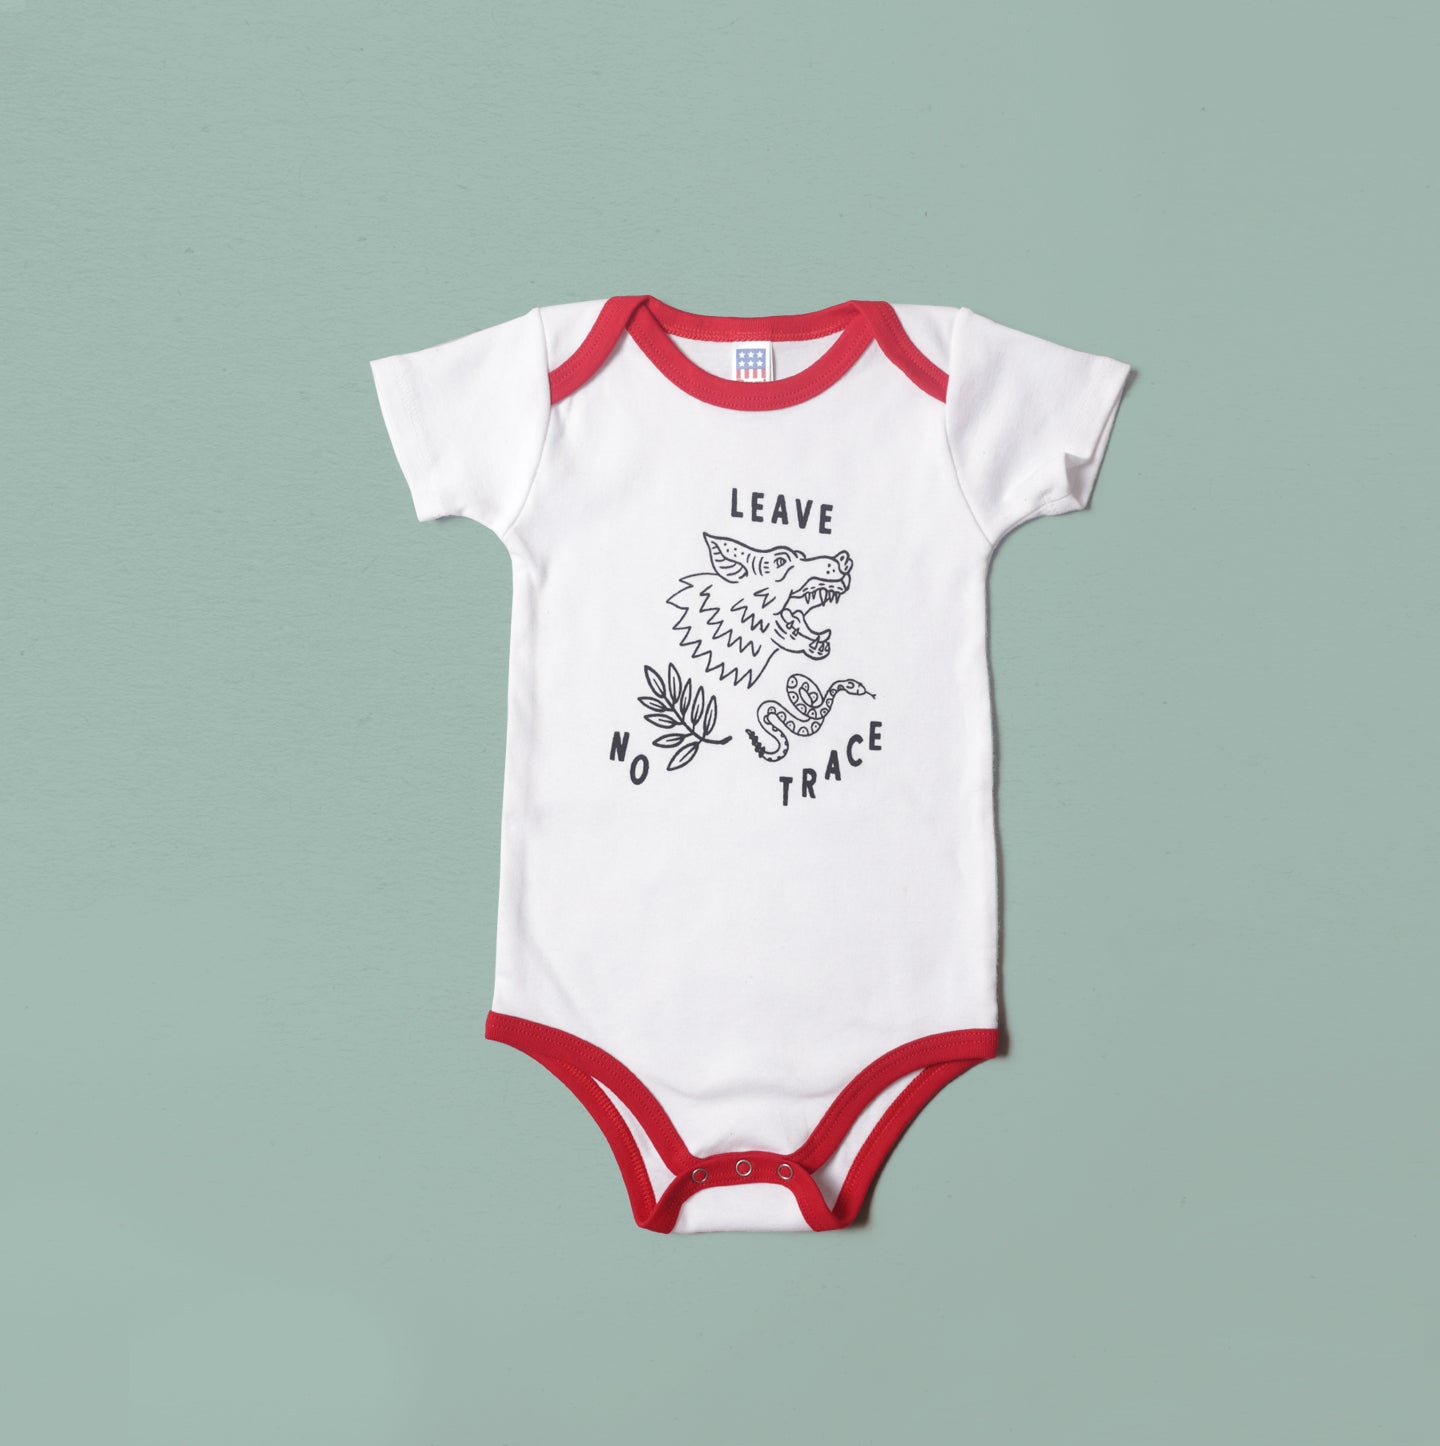 Leave No Trace Onesie - White/Red